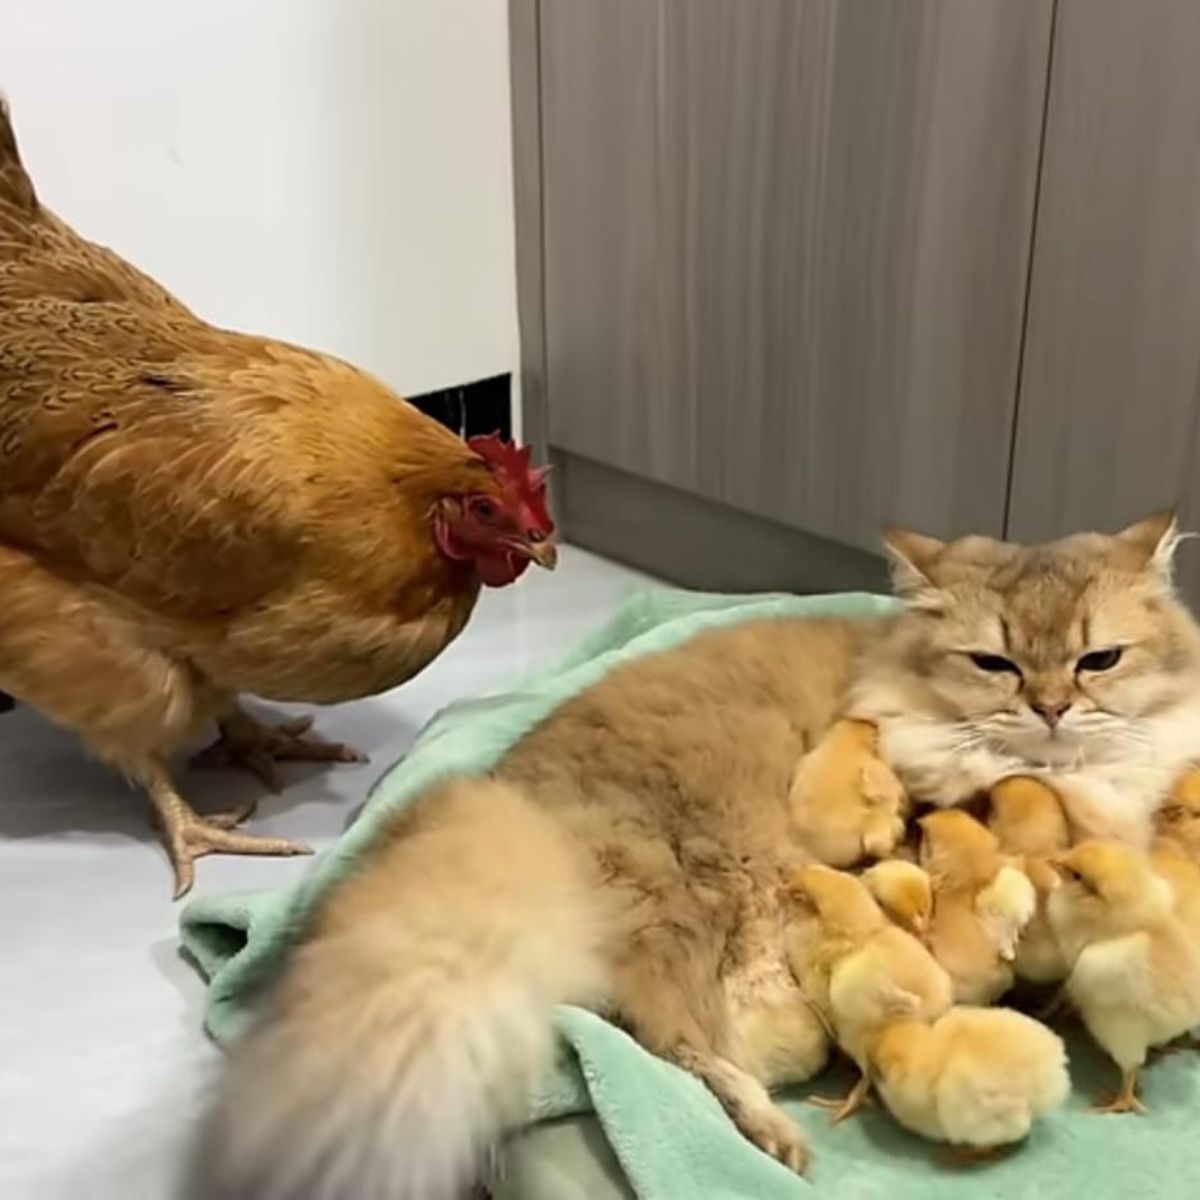 a cat, a chicken and some chicks